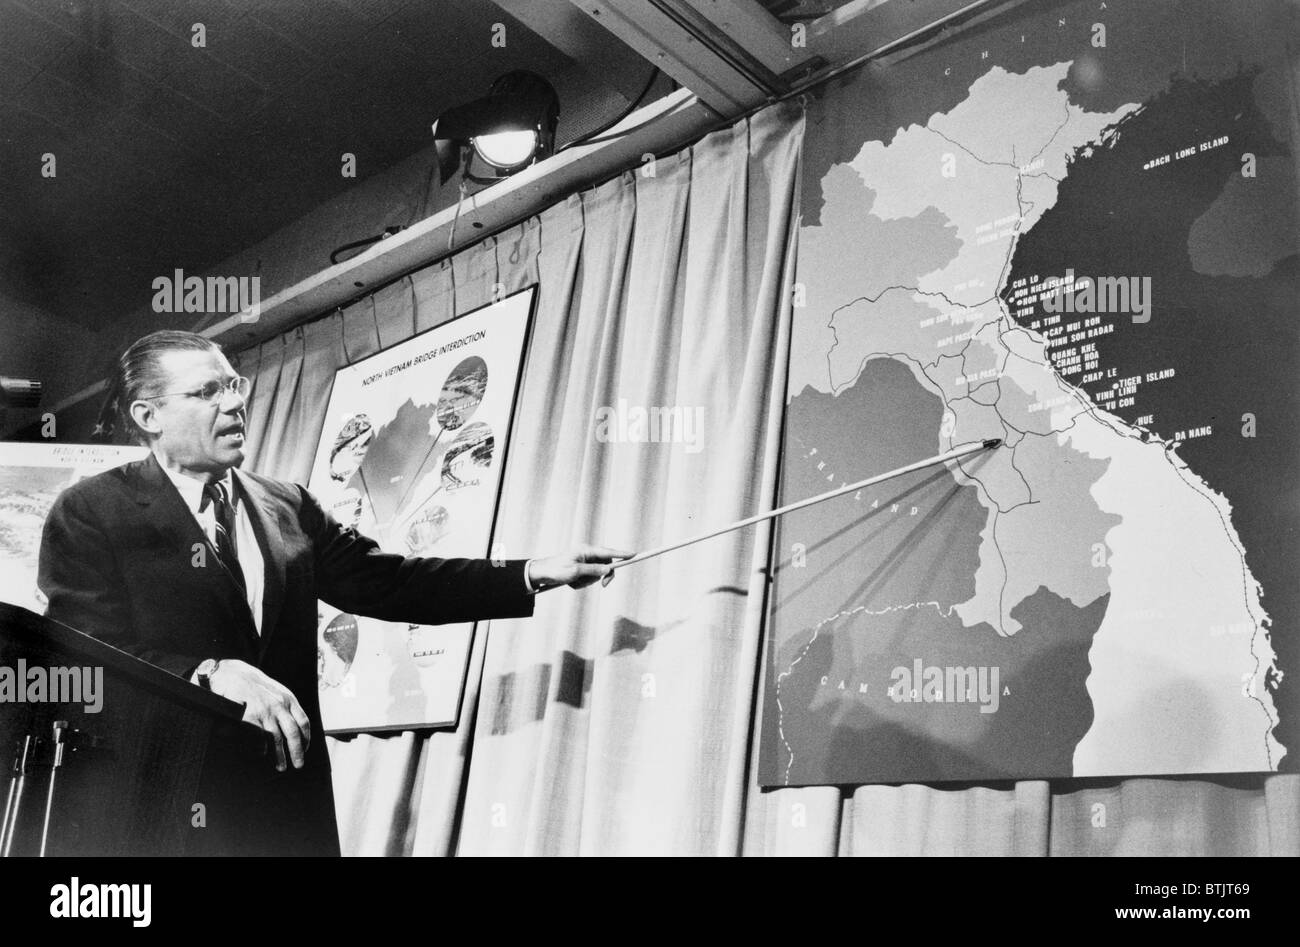 Secretary of Defense Robert McNamera pointing to a map of Vietnam at a press conference, photograph by Marion S. Trikosko, April 26, 1965. Stock Photo